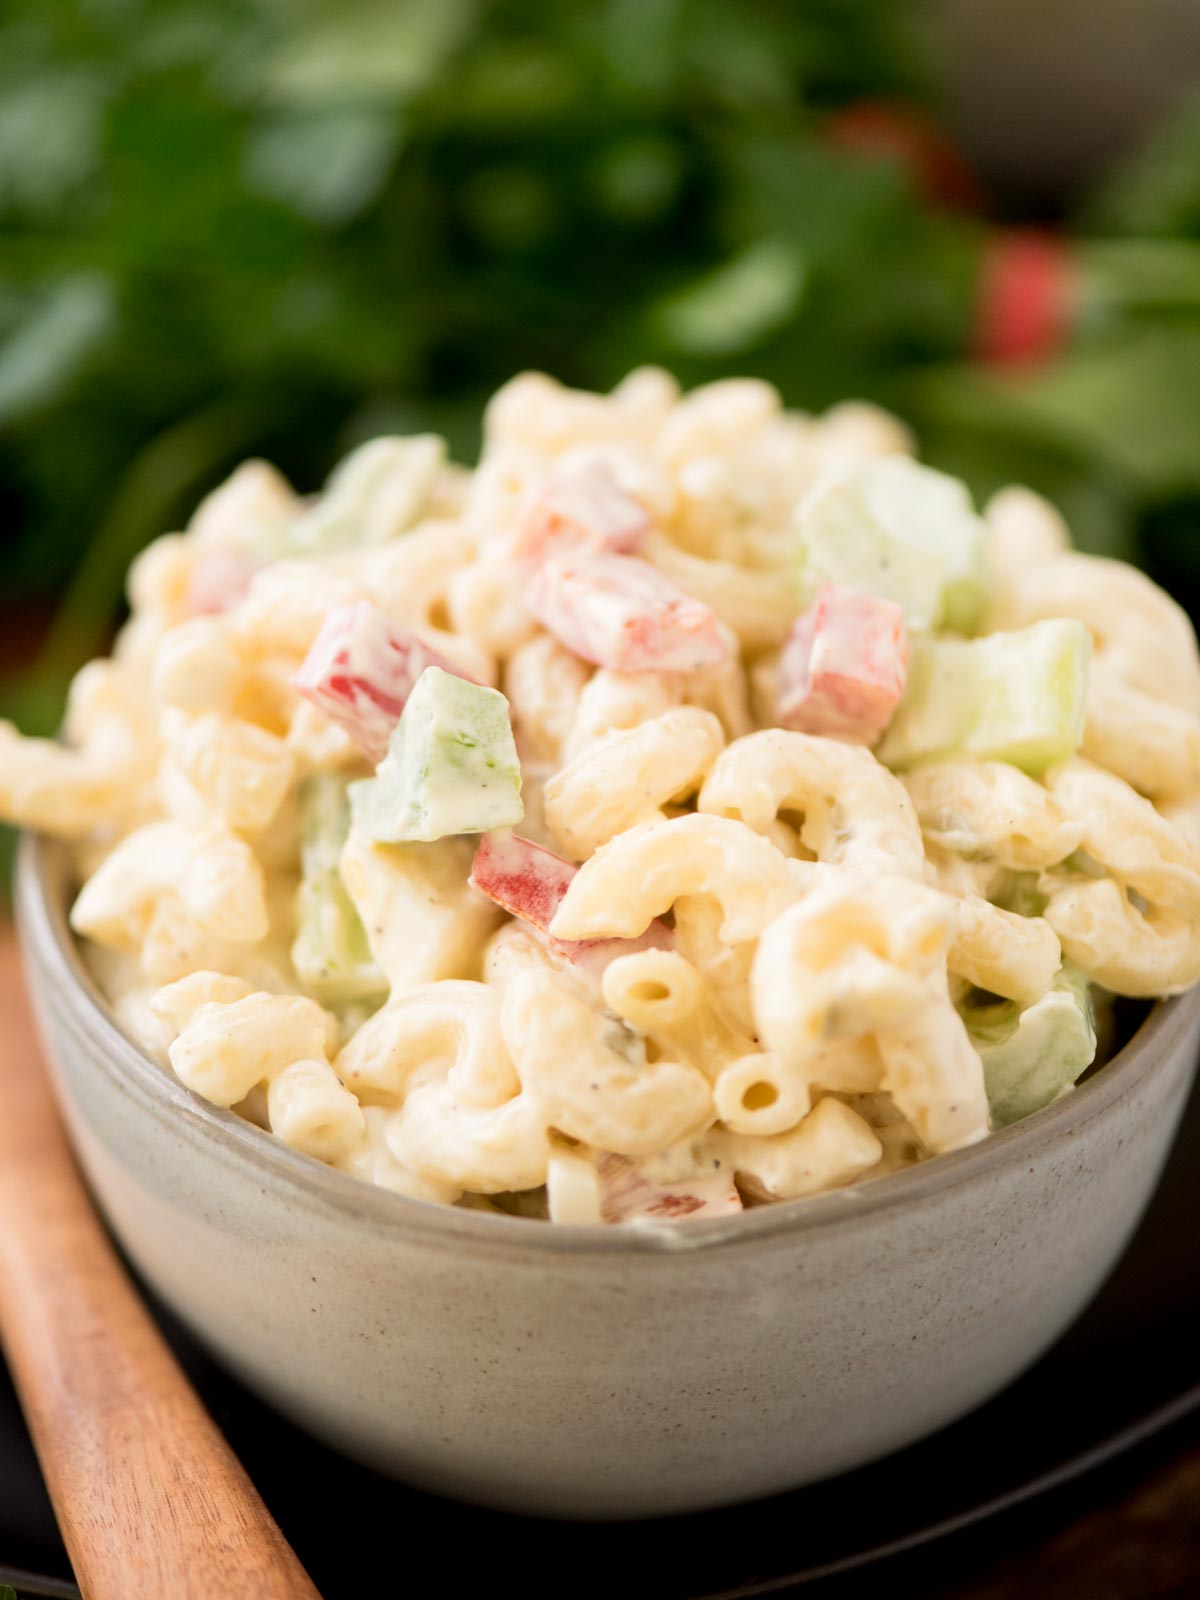 Macaroni salad in a grey bowl surrounded by a serving spoon and fresh parsley.